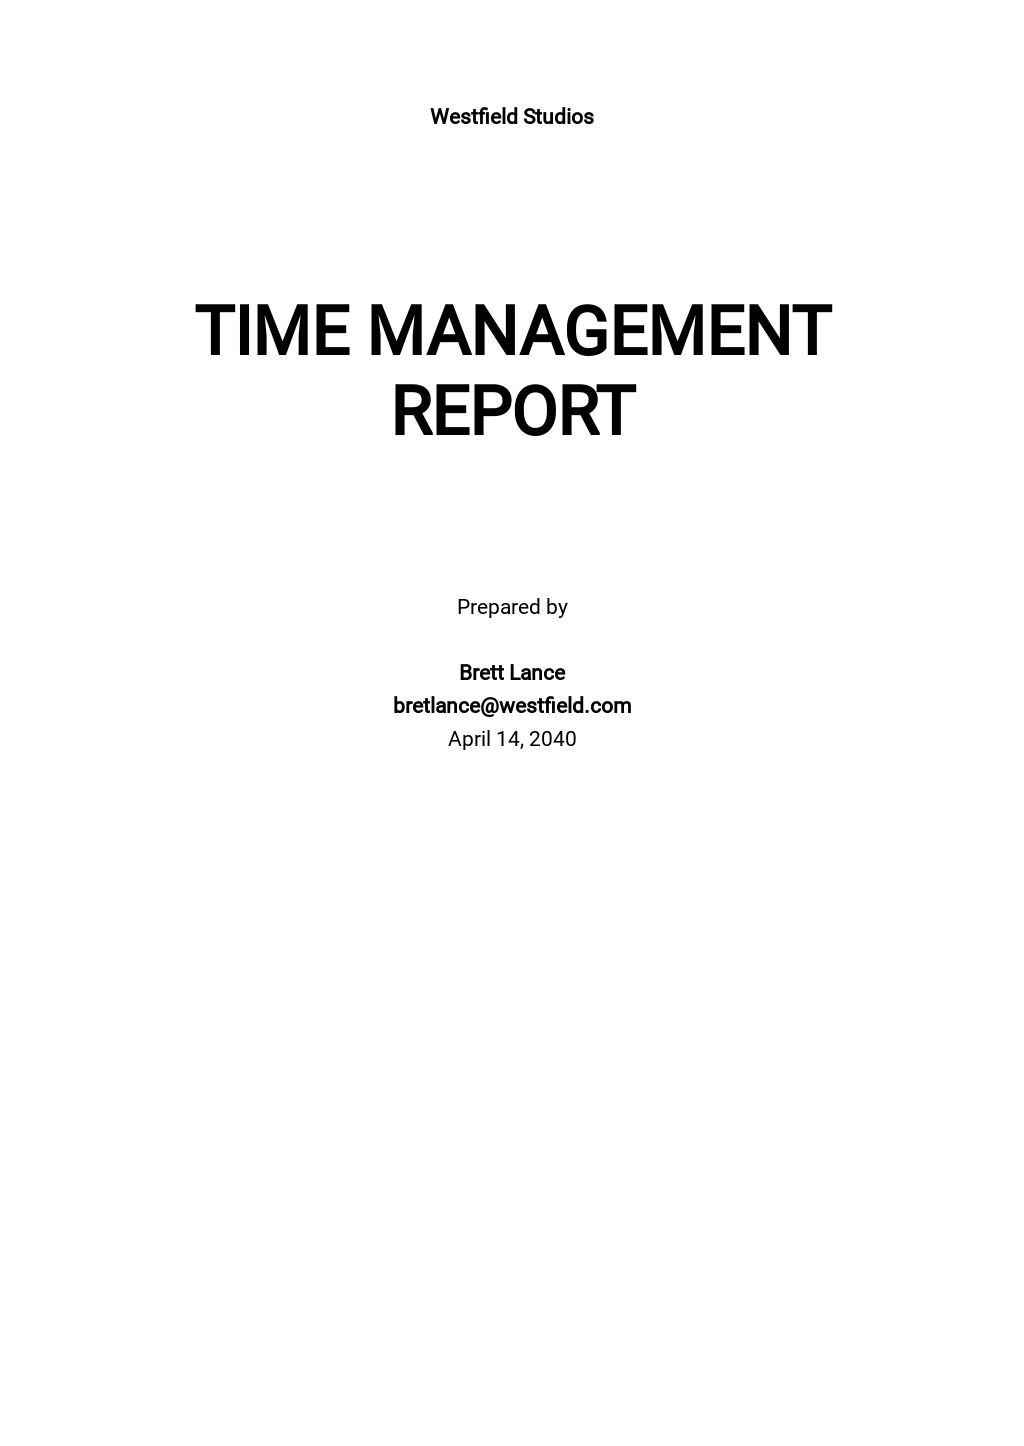 templete for time management report free 2